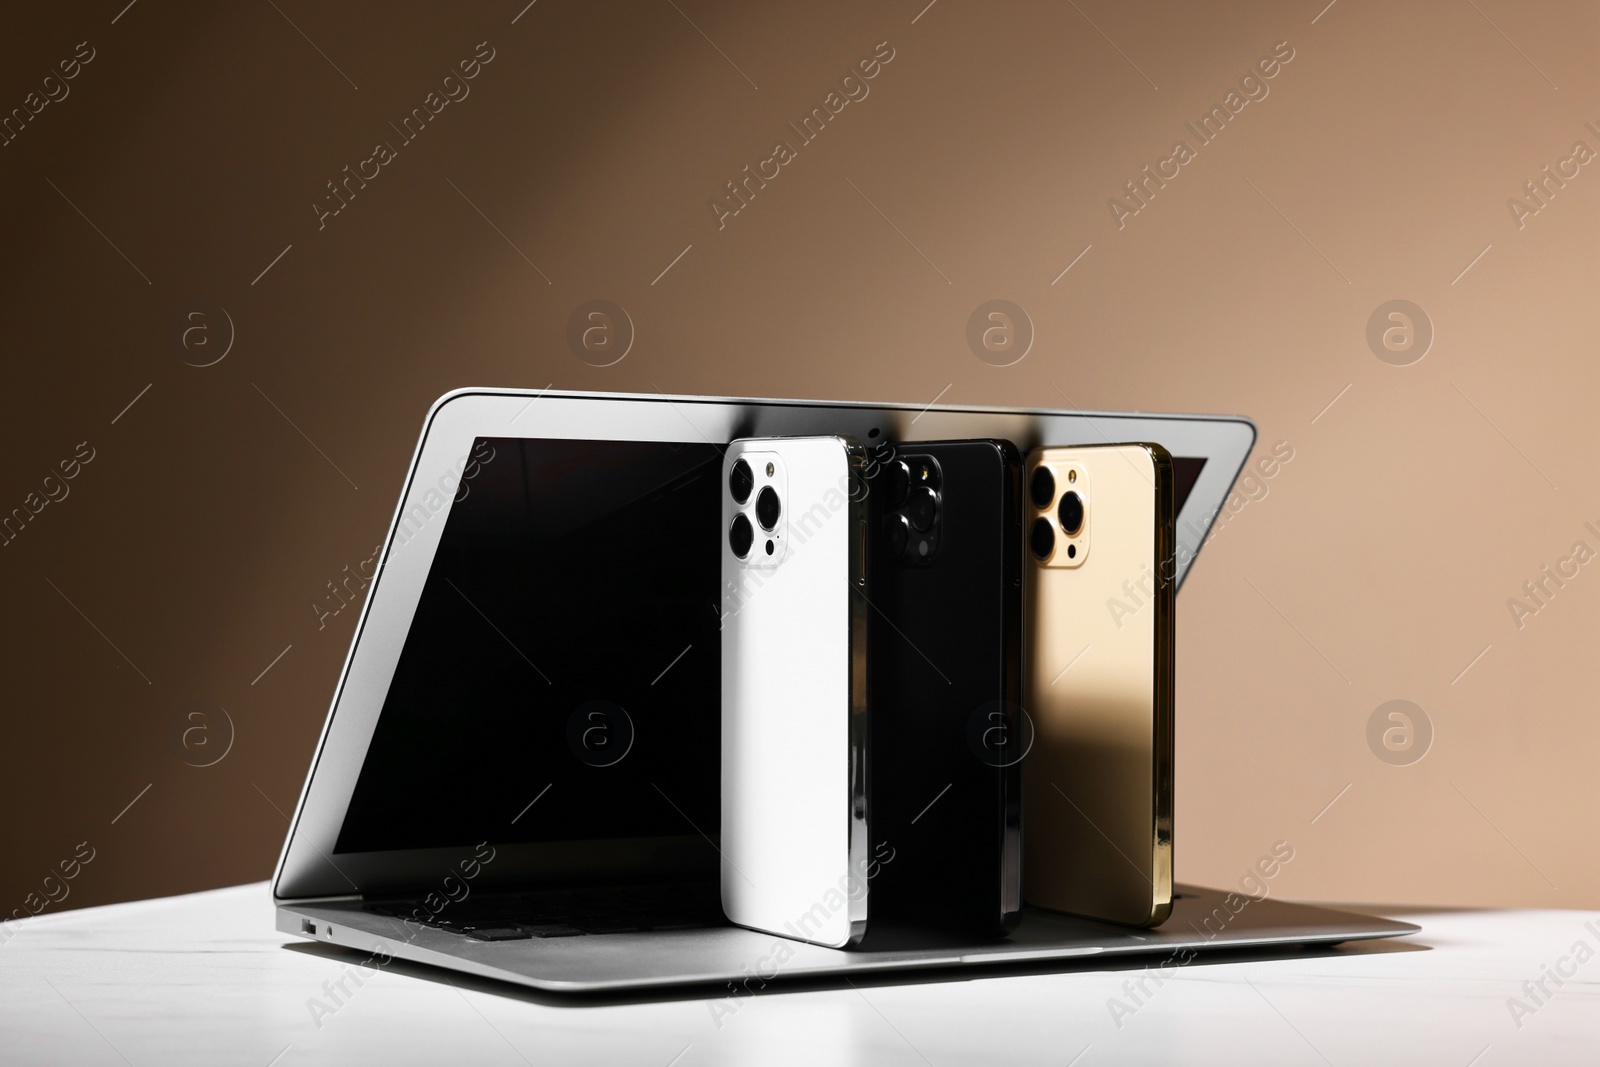 Photo of Modern laptop and smartphones on white table against brown background